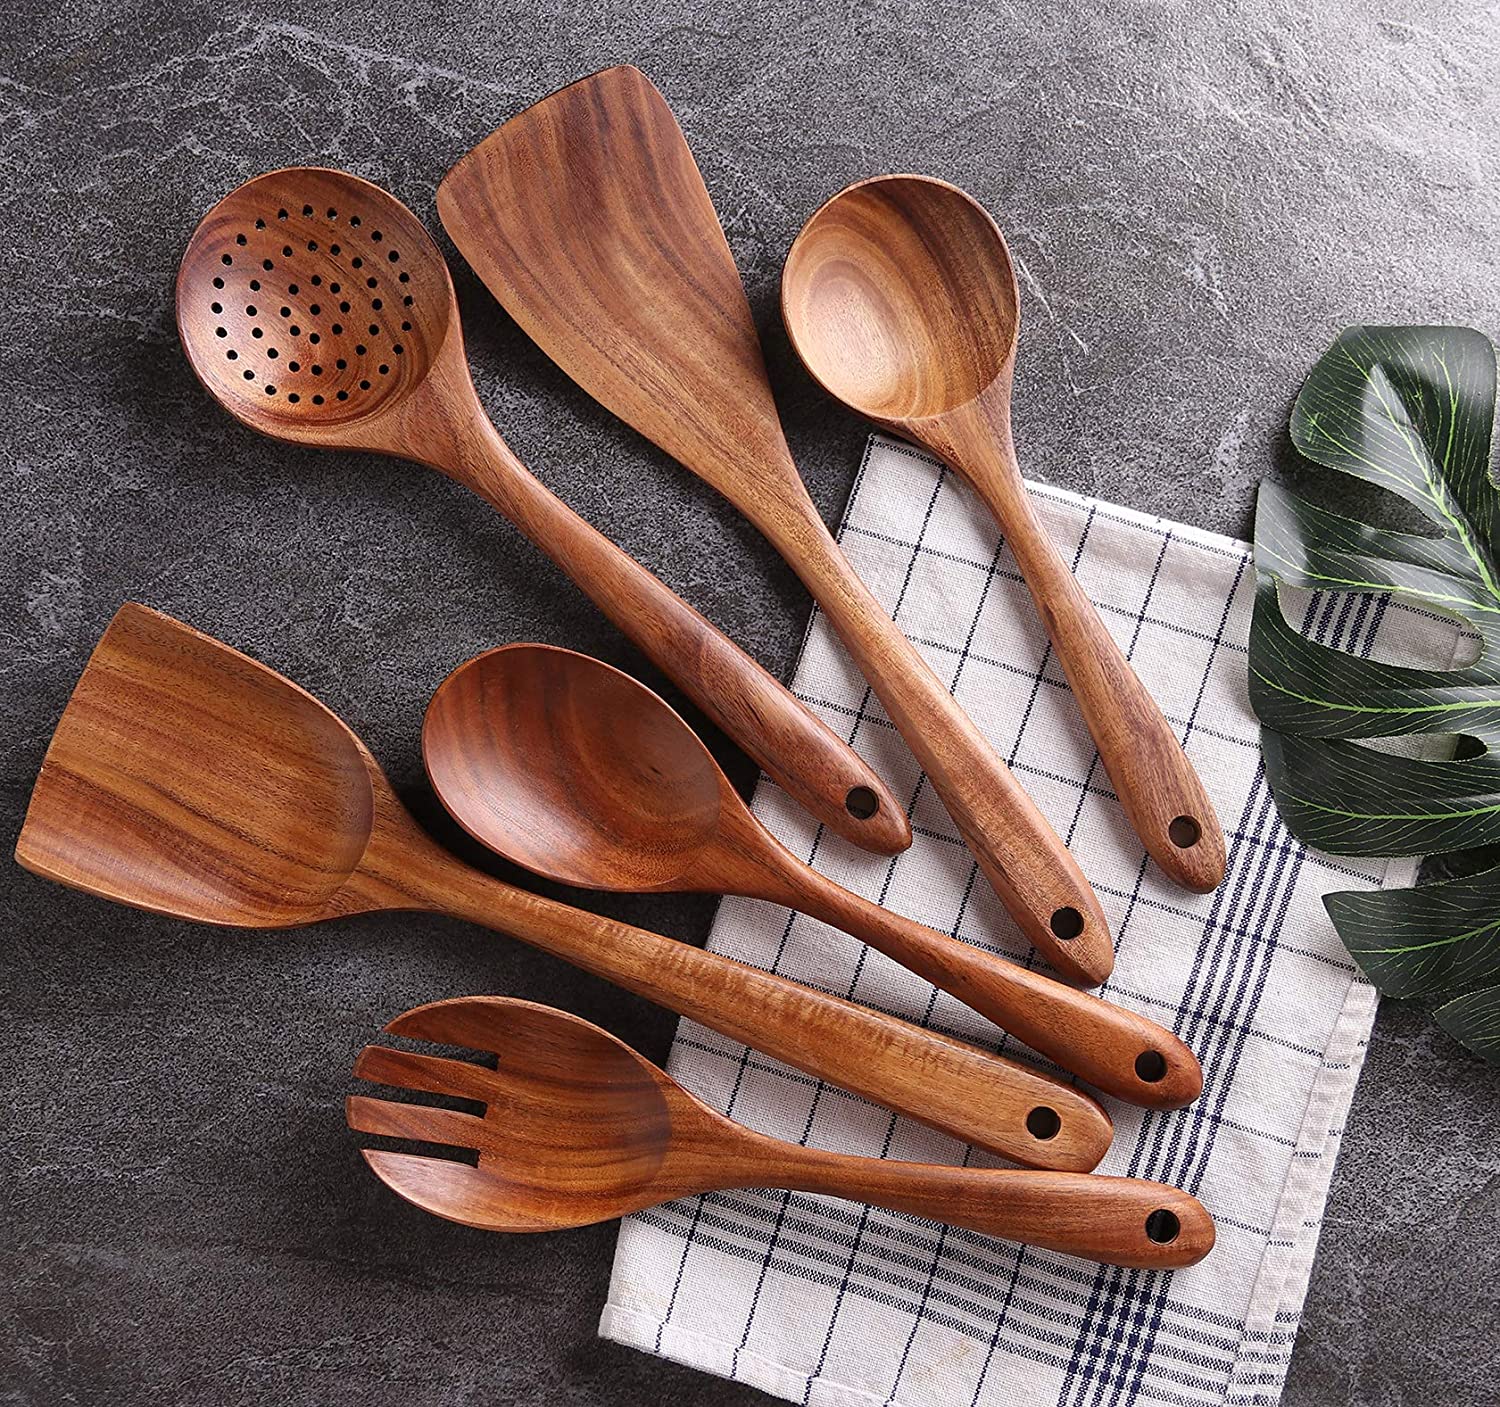 Wooden Utensils For Cooking,11 Pcs Wooden Spoons For Cooking, Teak Wooden  Utensils Set, Wood Kitchen Utensils For Nonstick Pan, Wood Spatula Spoon